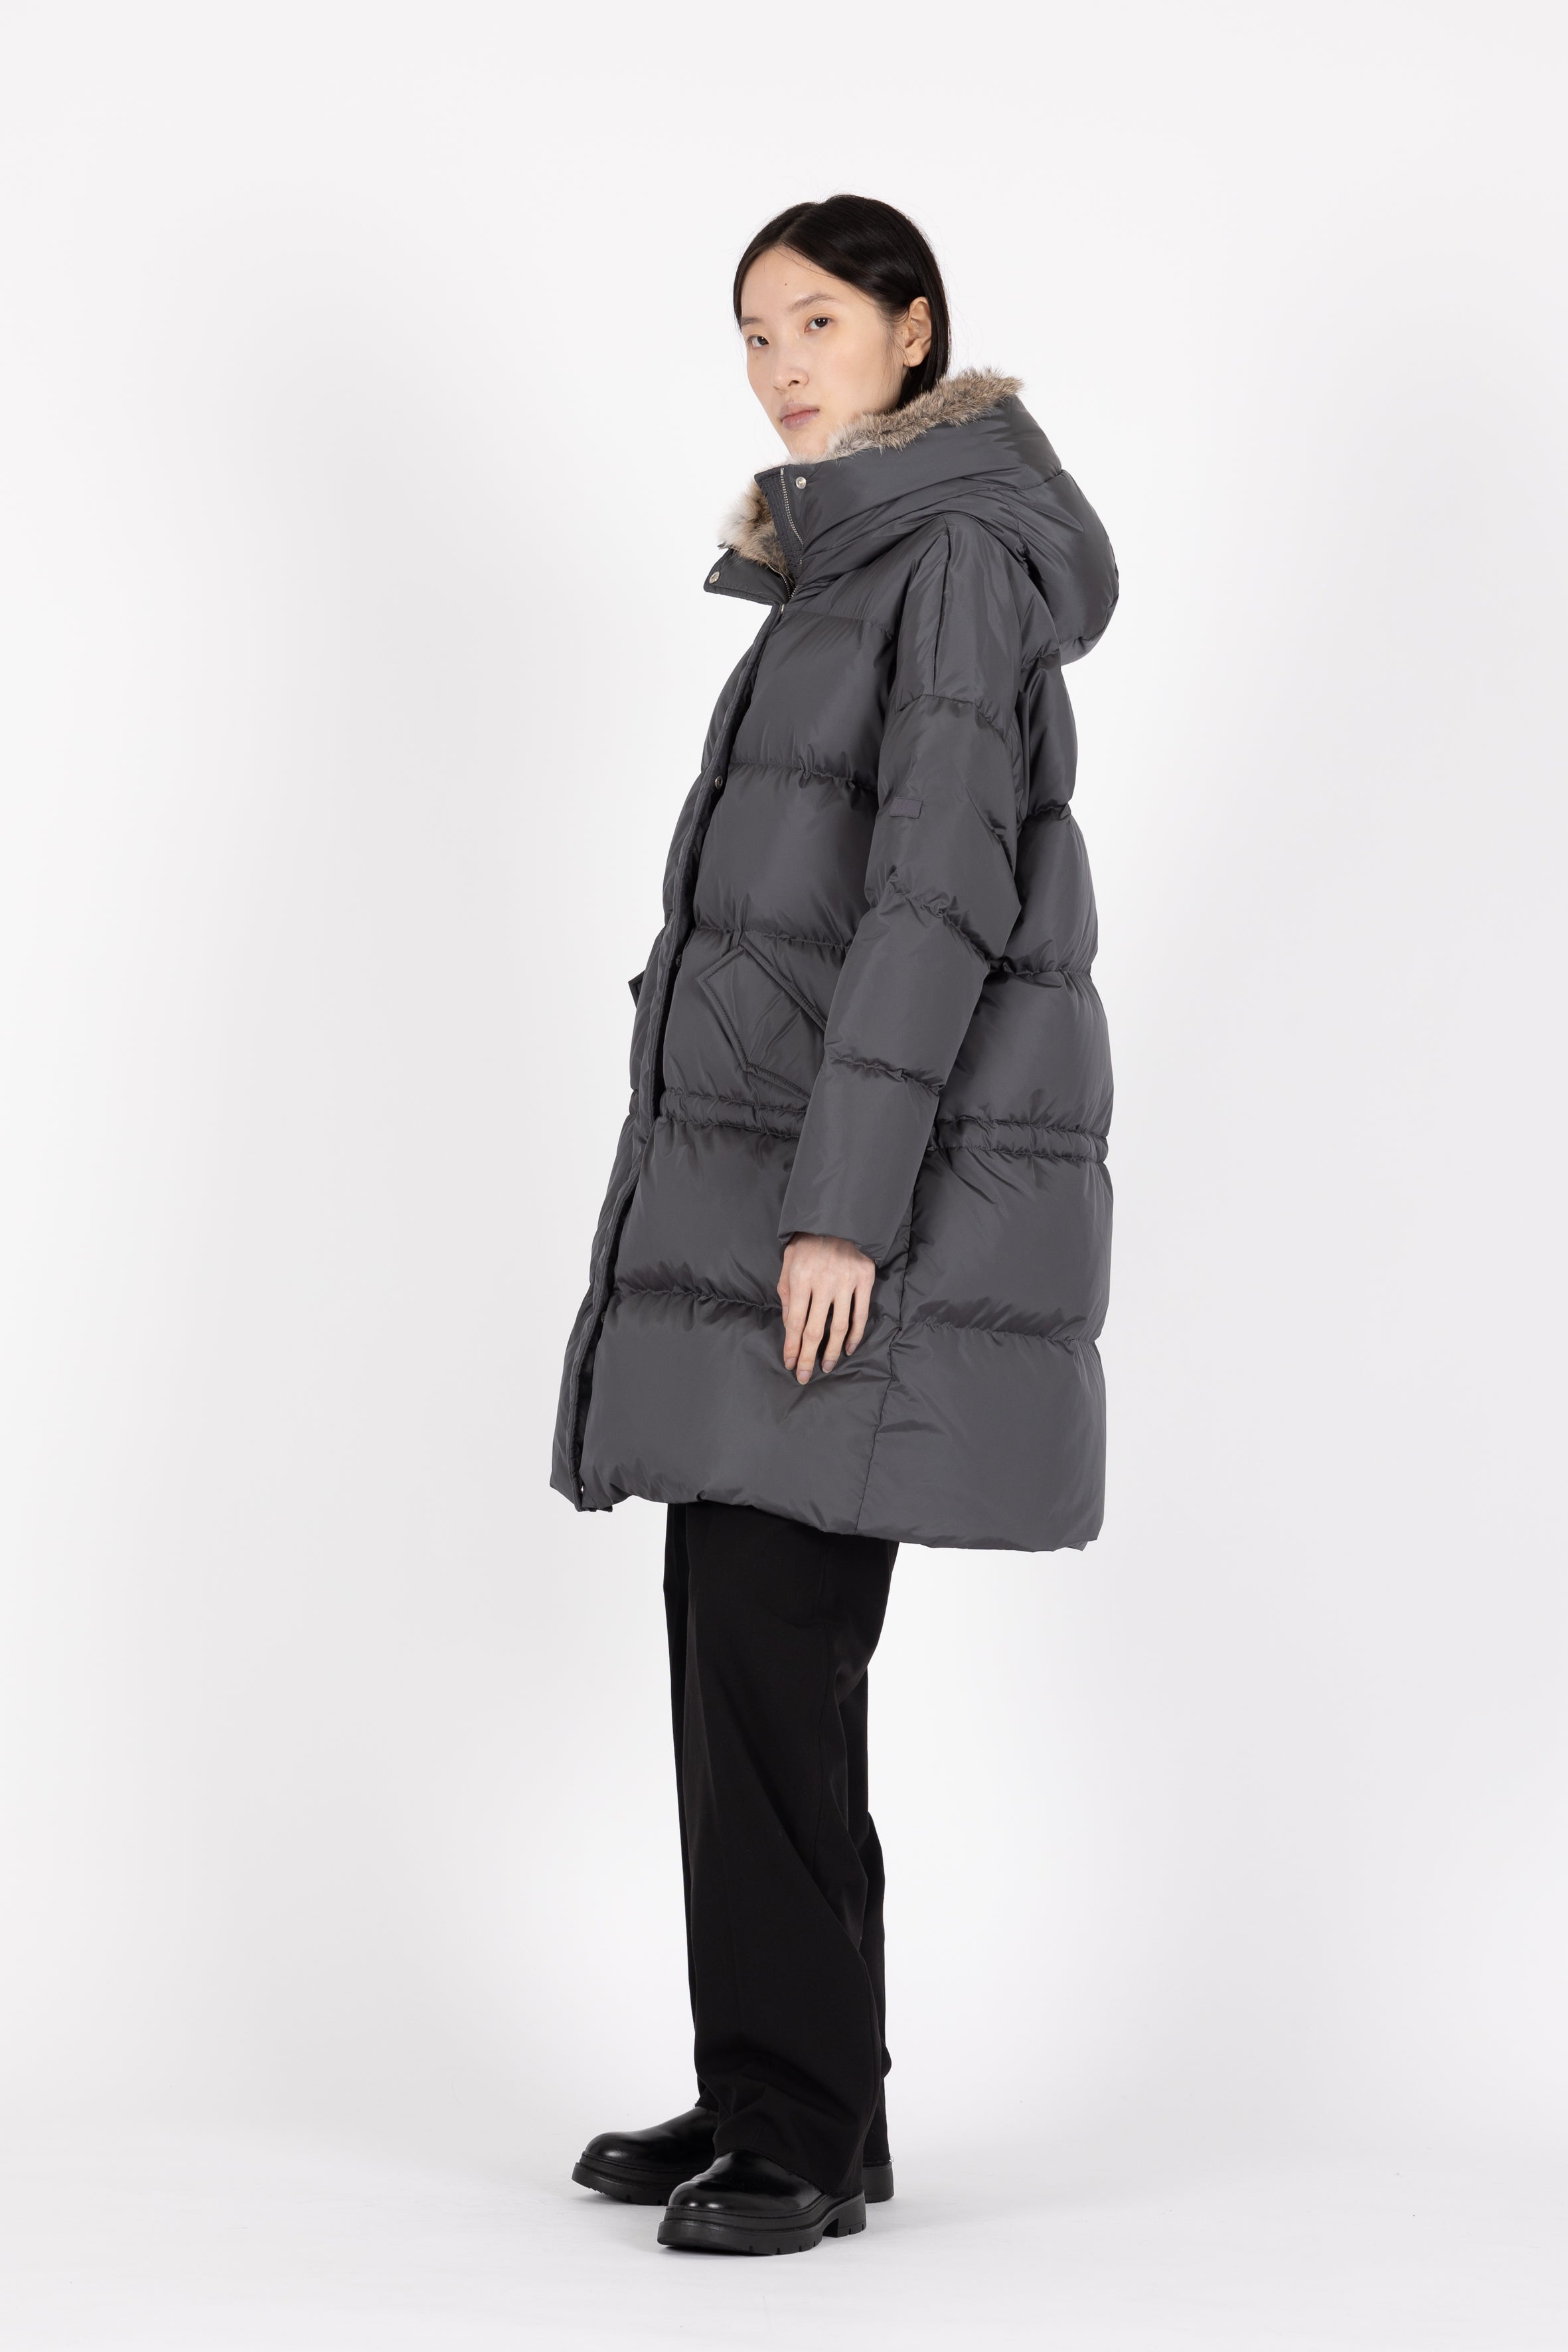 oversized Lempelius down parka in the color iron grey